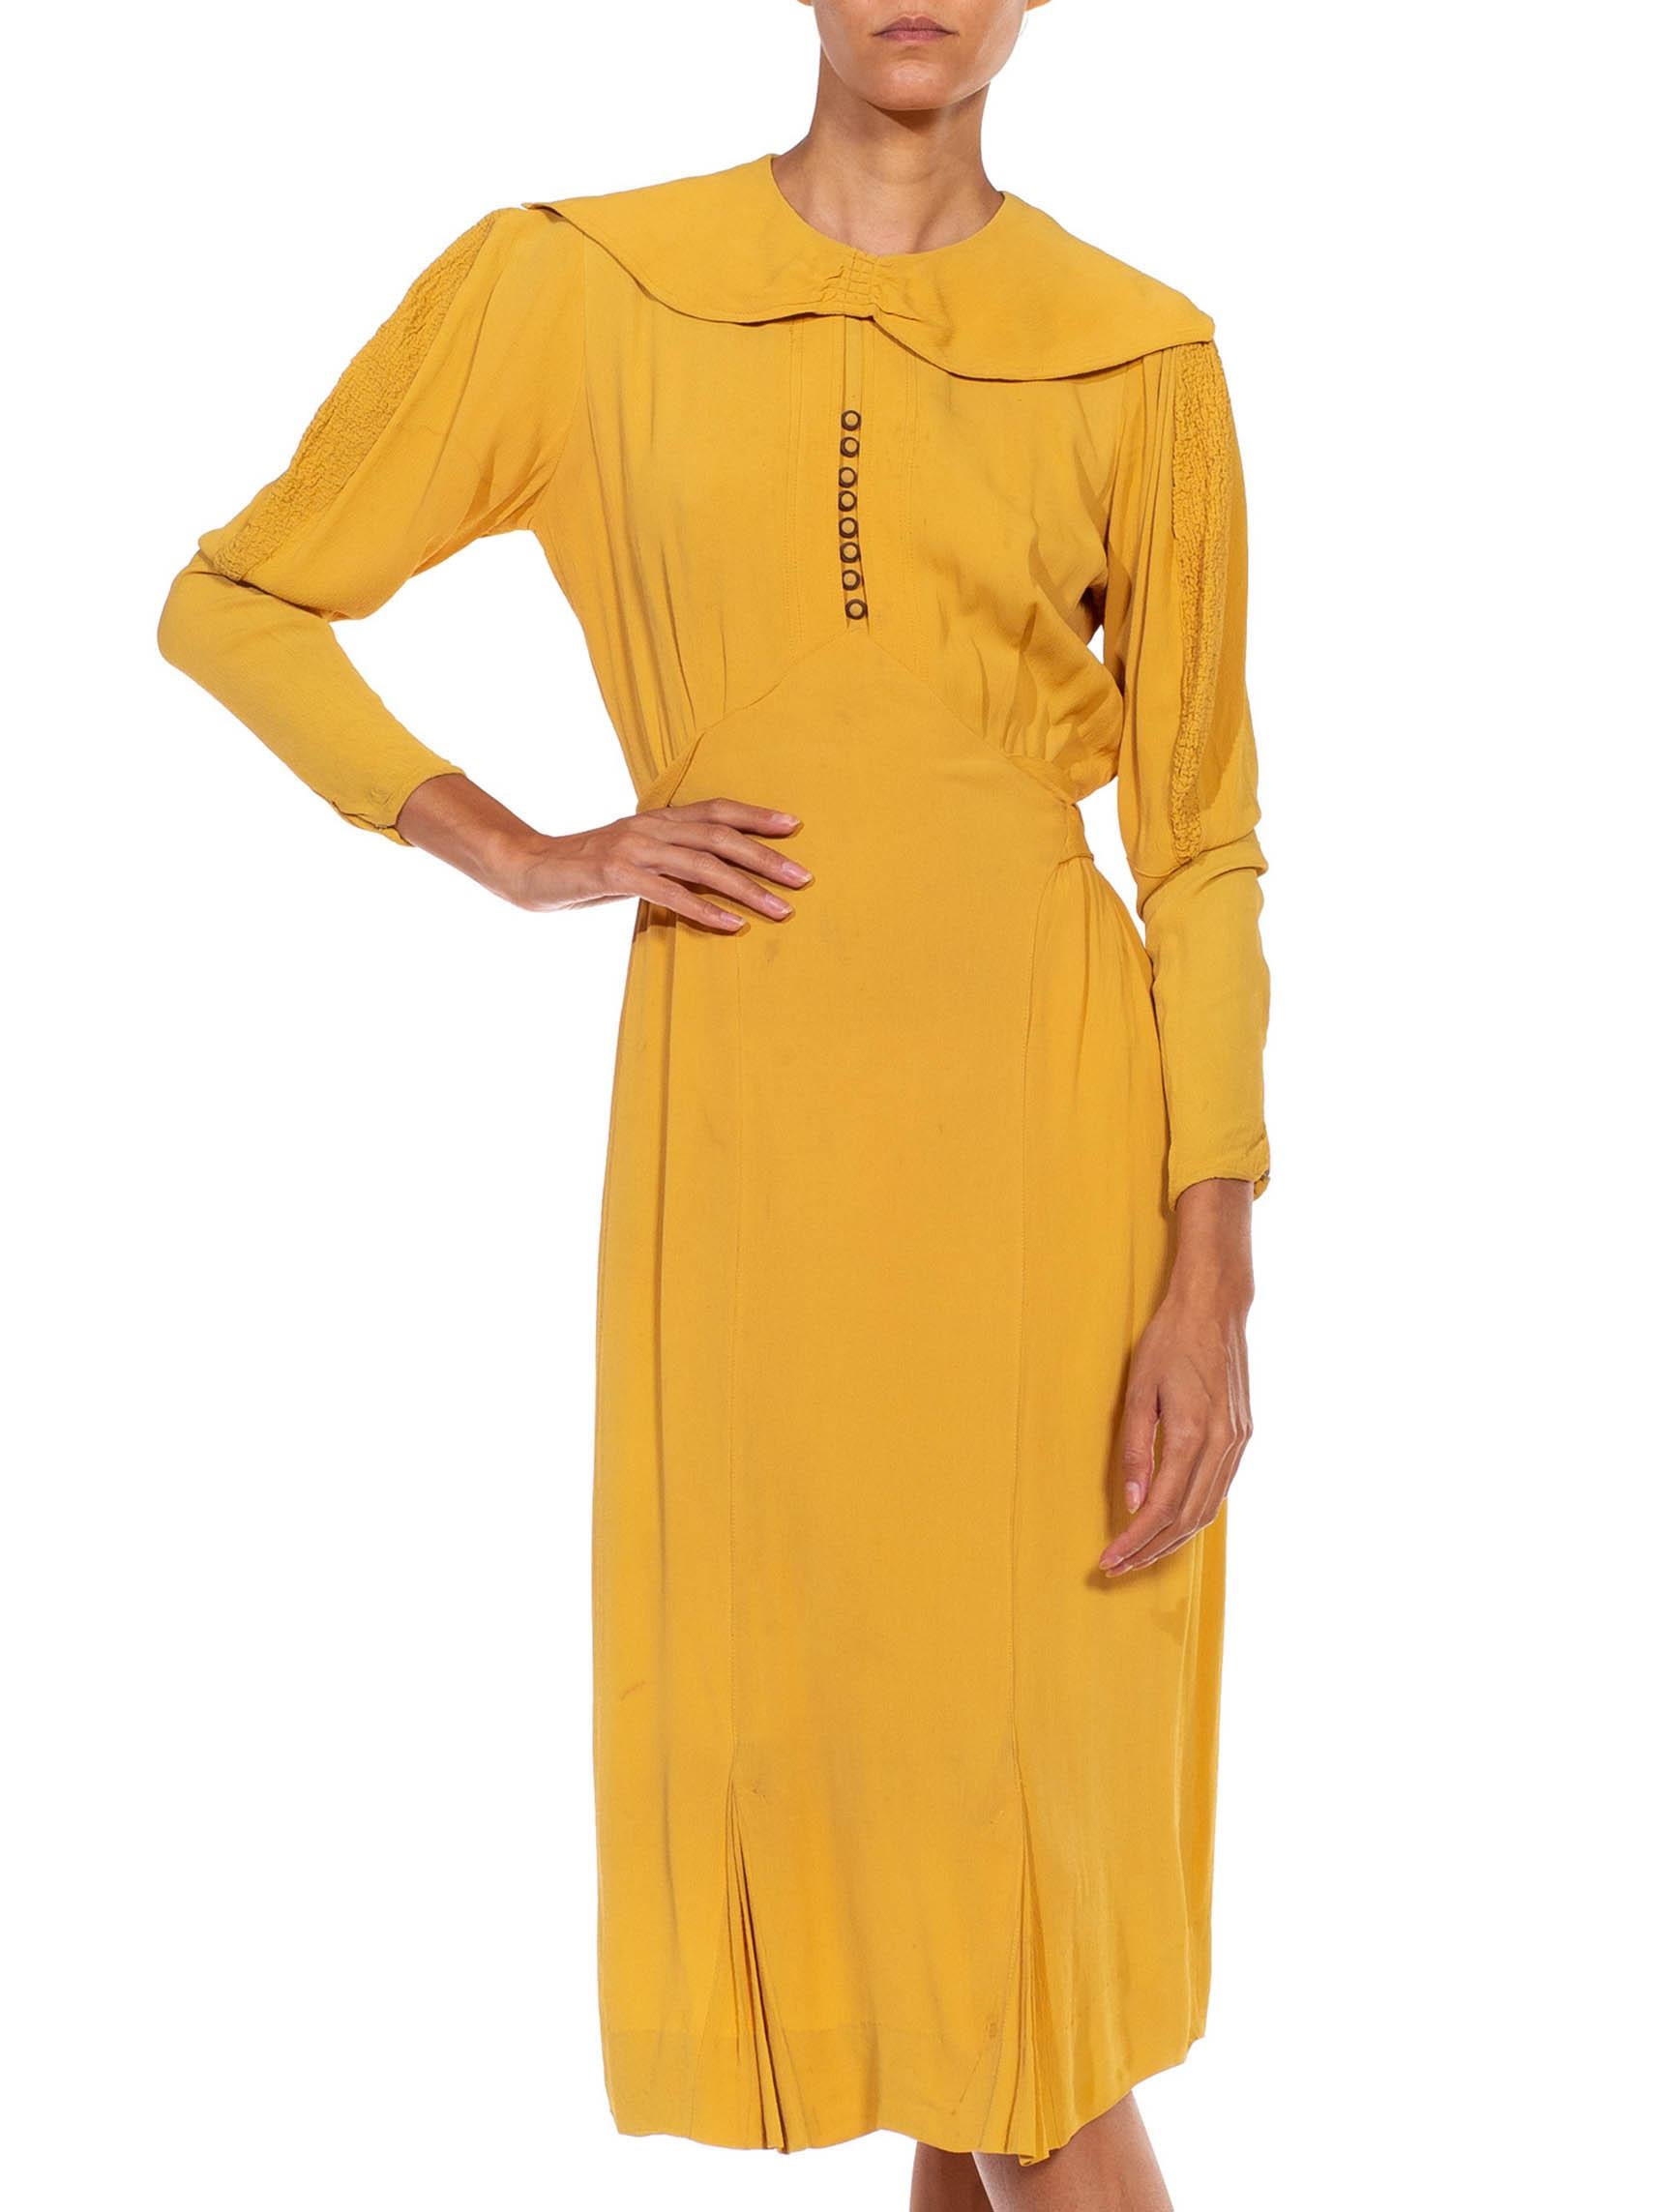 1930S Mustard Yellow Rayon Crepe Caplet Dress With Leg O Mutton Sleeves For Sale 2